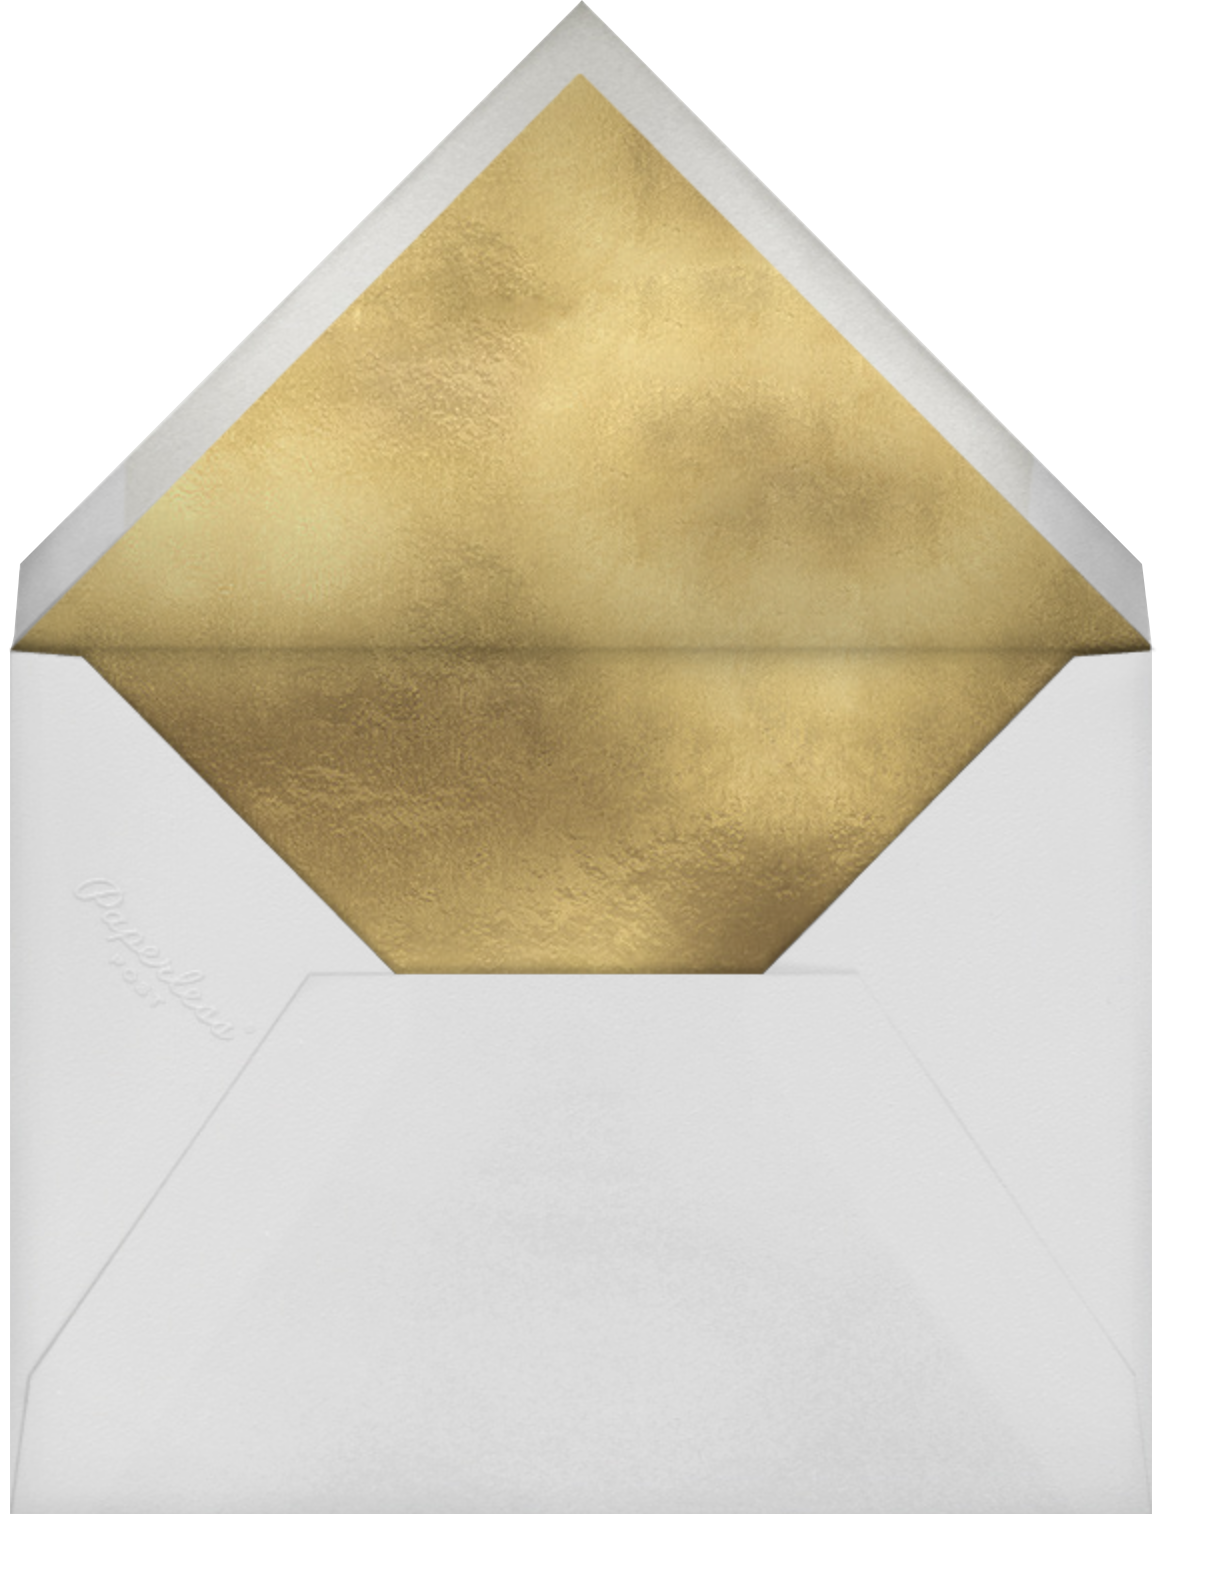 Gingerbread House (Invitation) - Rifle Paper Co. - Envelope